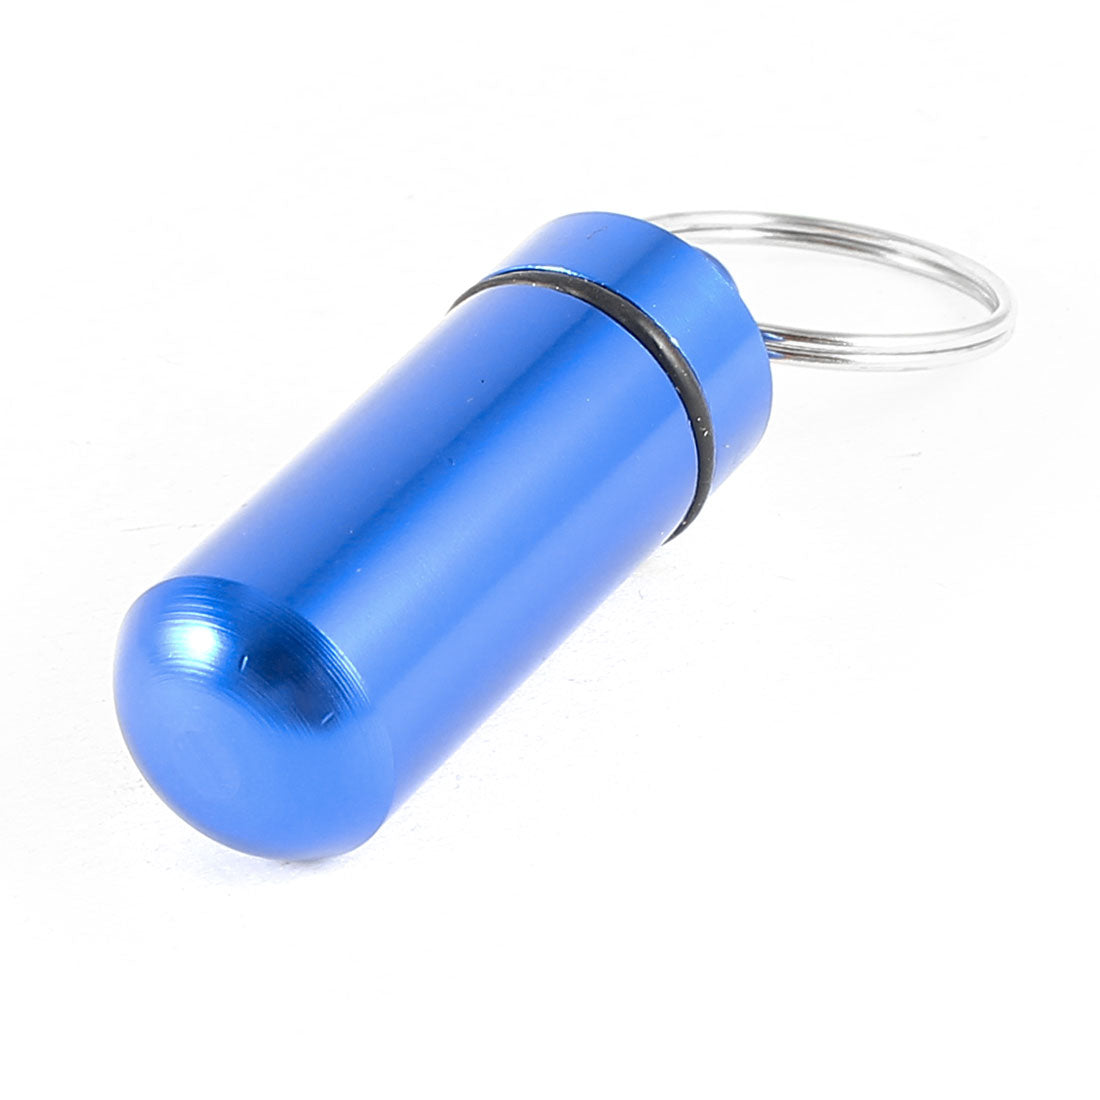 uxcell Uxcell Travel Waterproof Aluminium Key Chain Pill Holder Box Case Bottle Container Blue